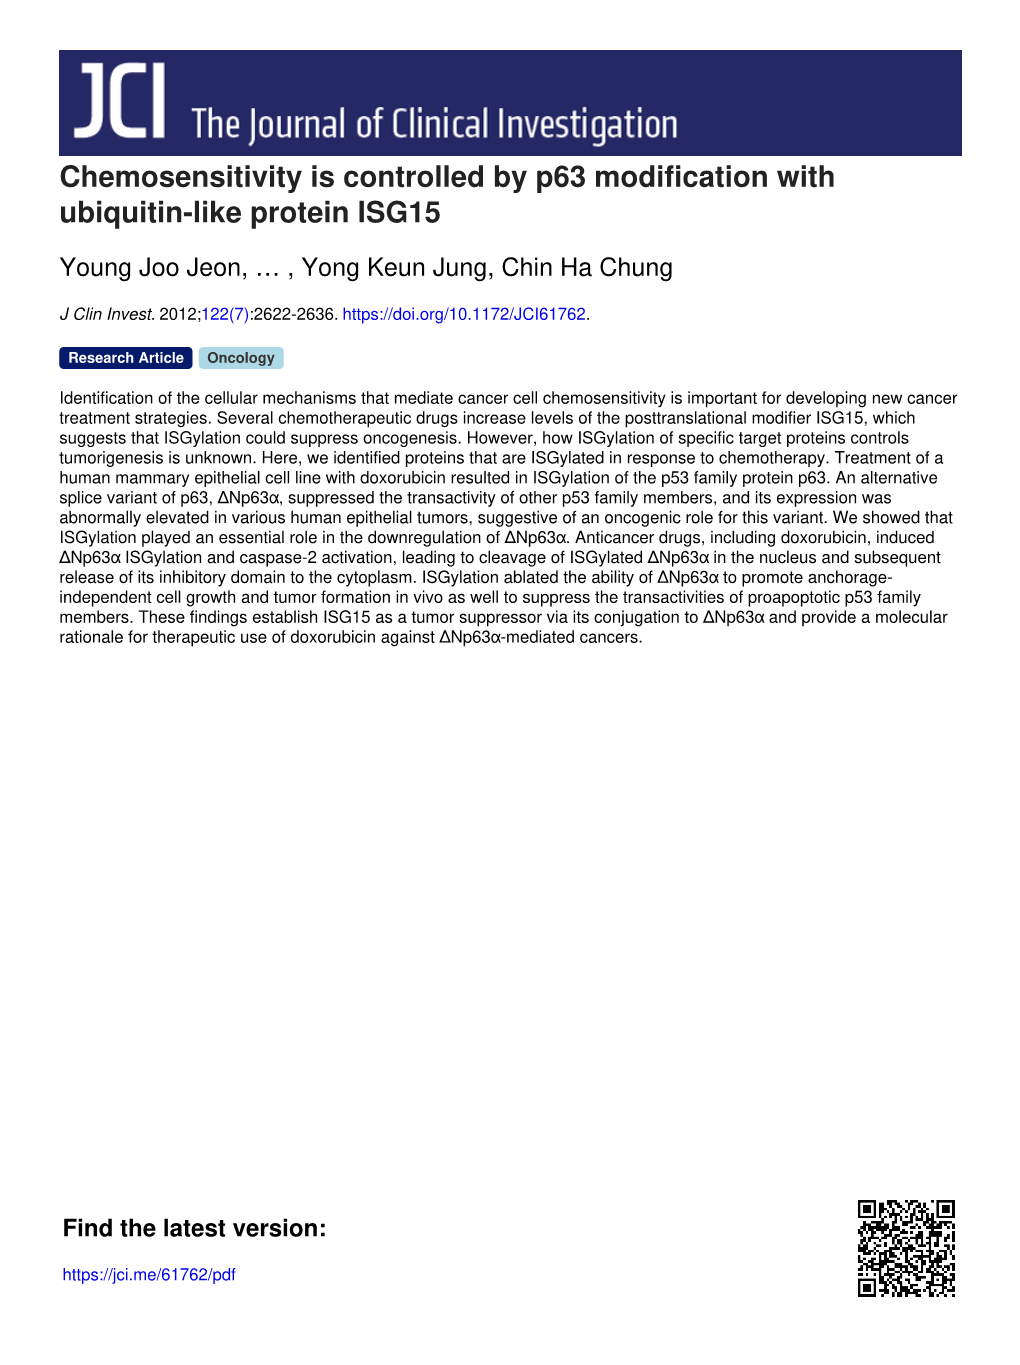 Chemosensitivity Is Controlled by P63 Modification with Ubiquitin-Like Protein ISG15